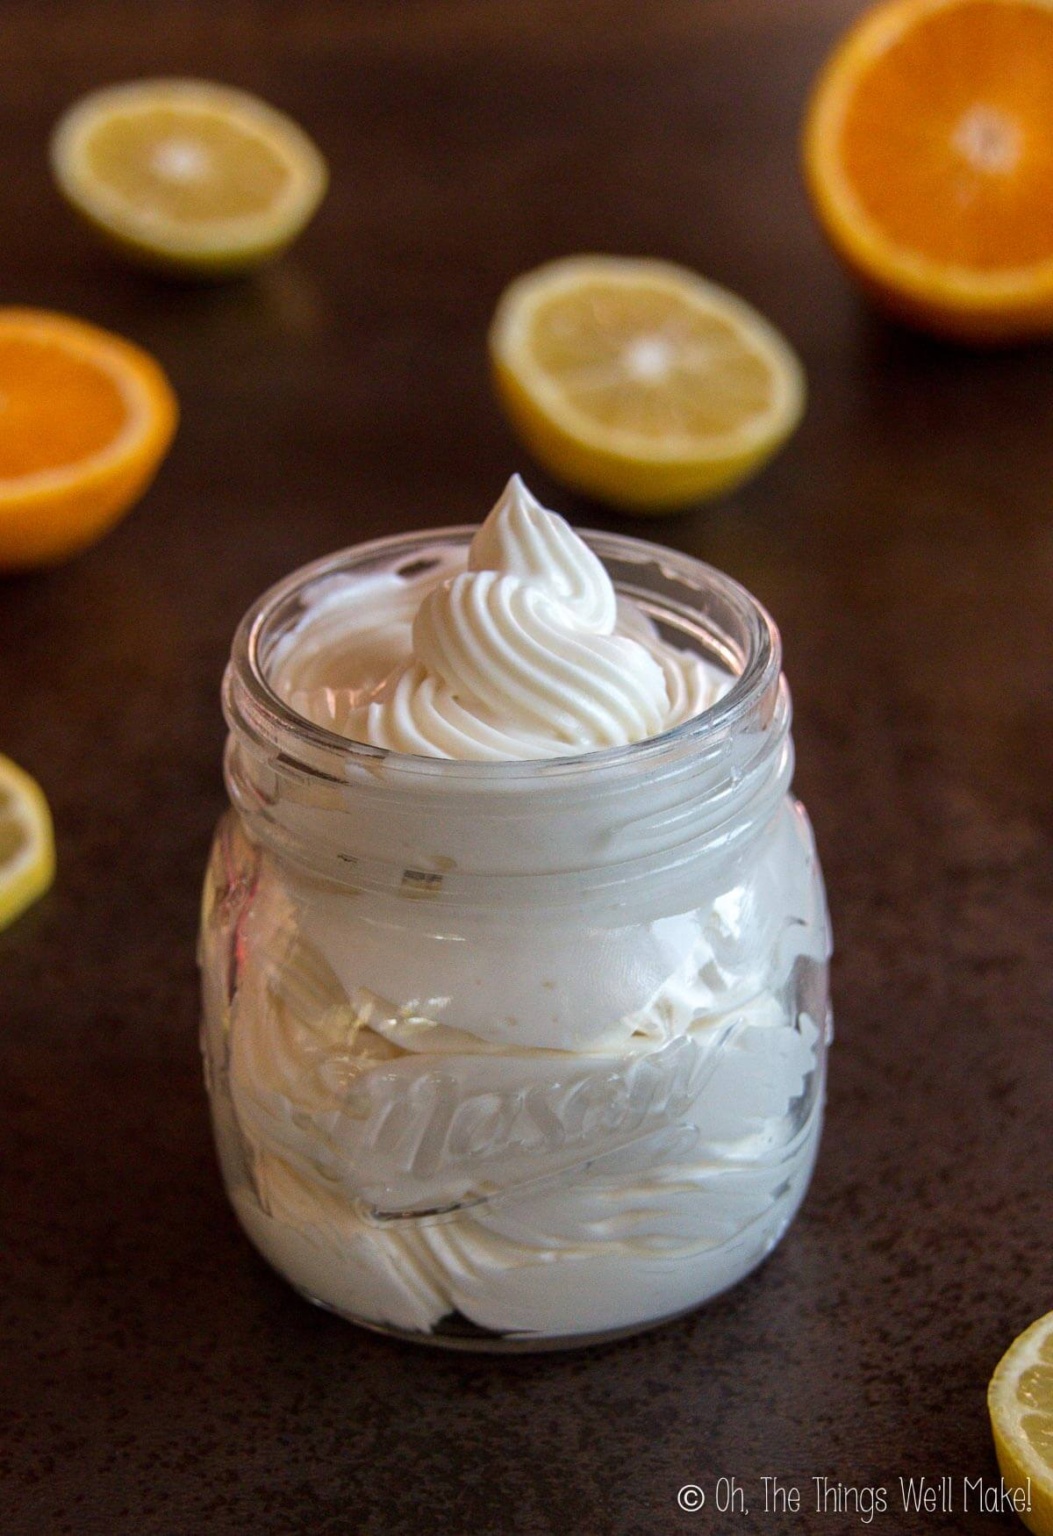 A jar of DIY whipped body butter surrounded by slices of citrus fruits.